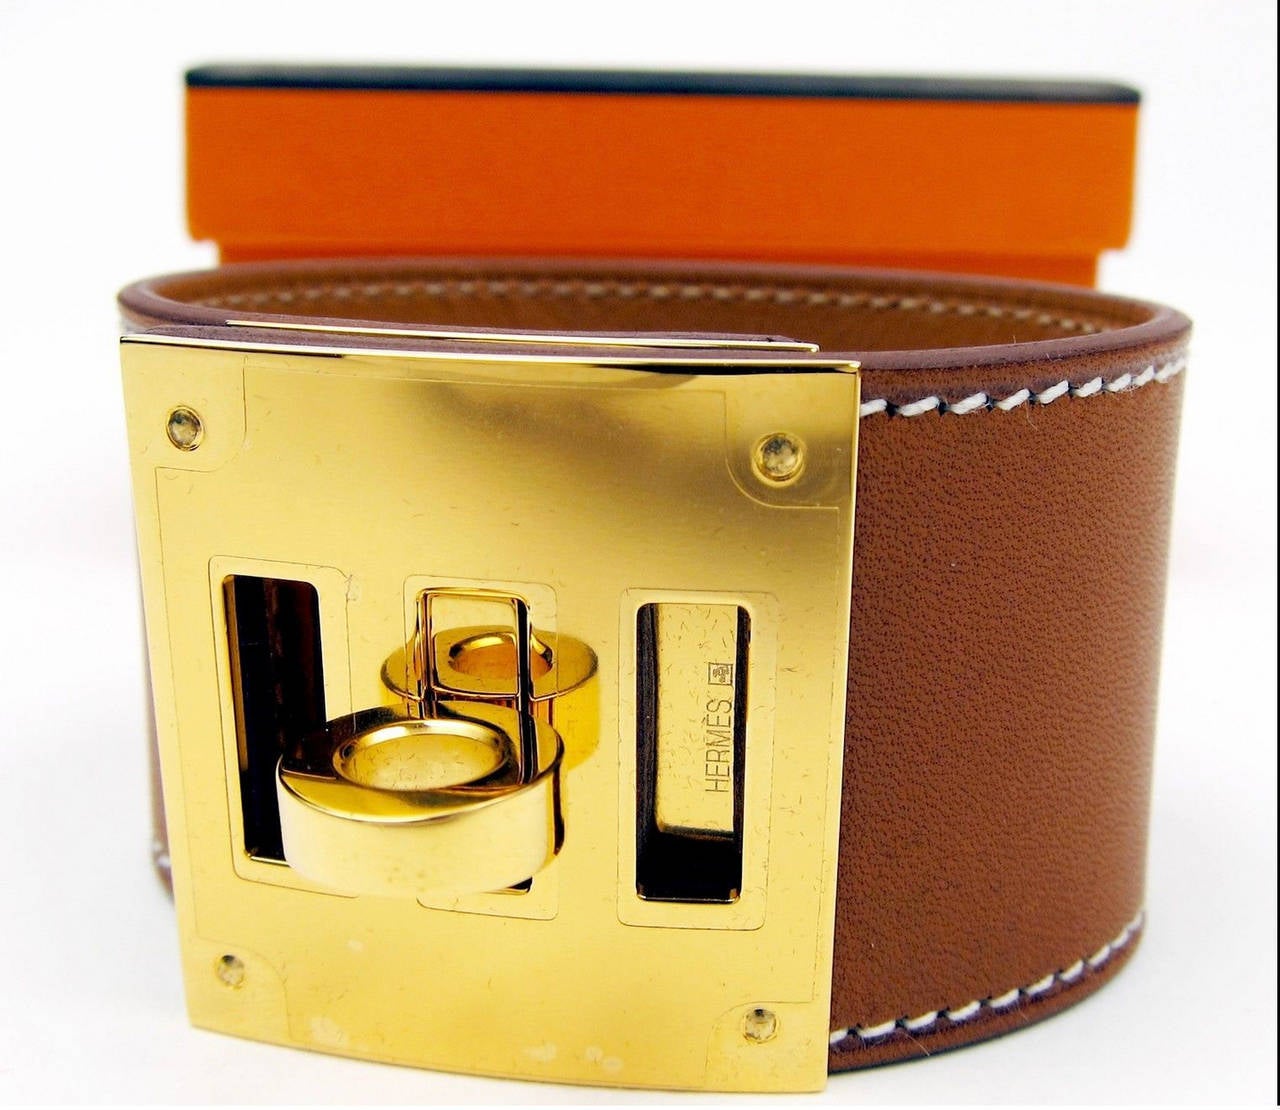 Hermes Fauve Barenia Kelly Dog Gold Hardware GHW Iconic

ICONIC HERMES LUXURY
FAUVE Barenia w/ Gold Hardware
Brand new in box.  Absolutely store fresh with plastic on hardware.  
Comes brand new with Hermes box and ribbon.  
Adjustable ladies'